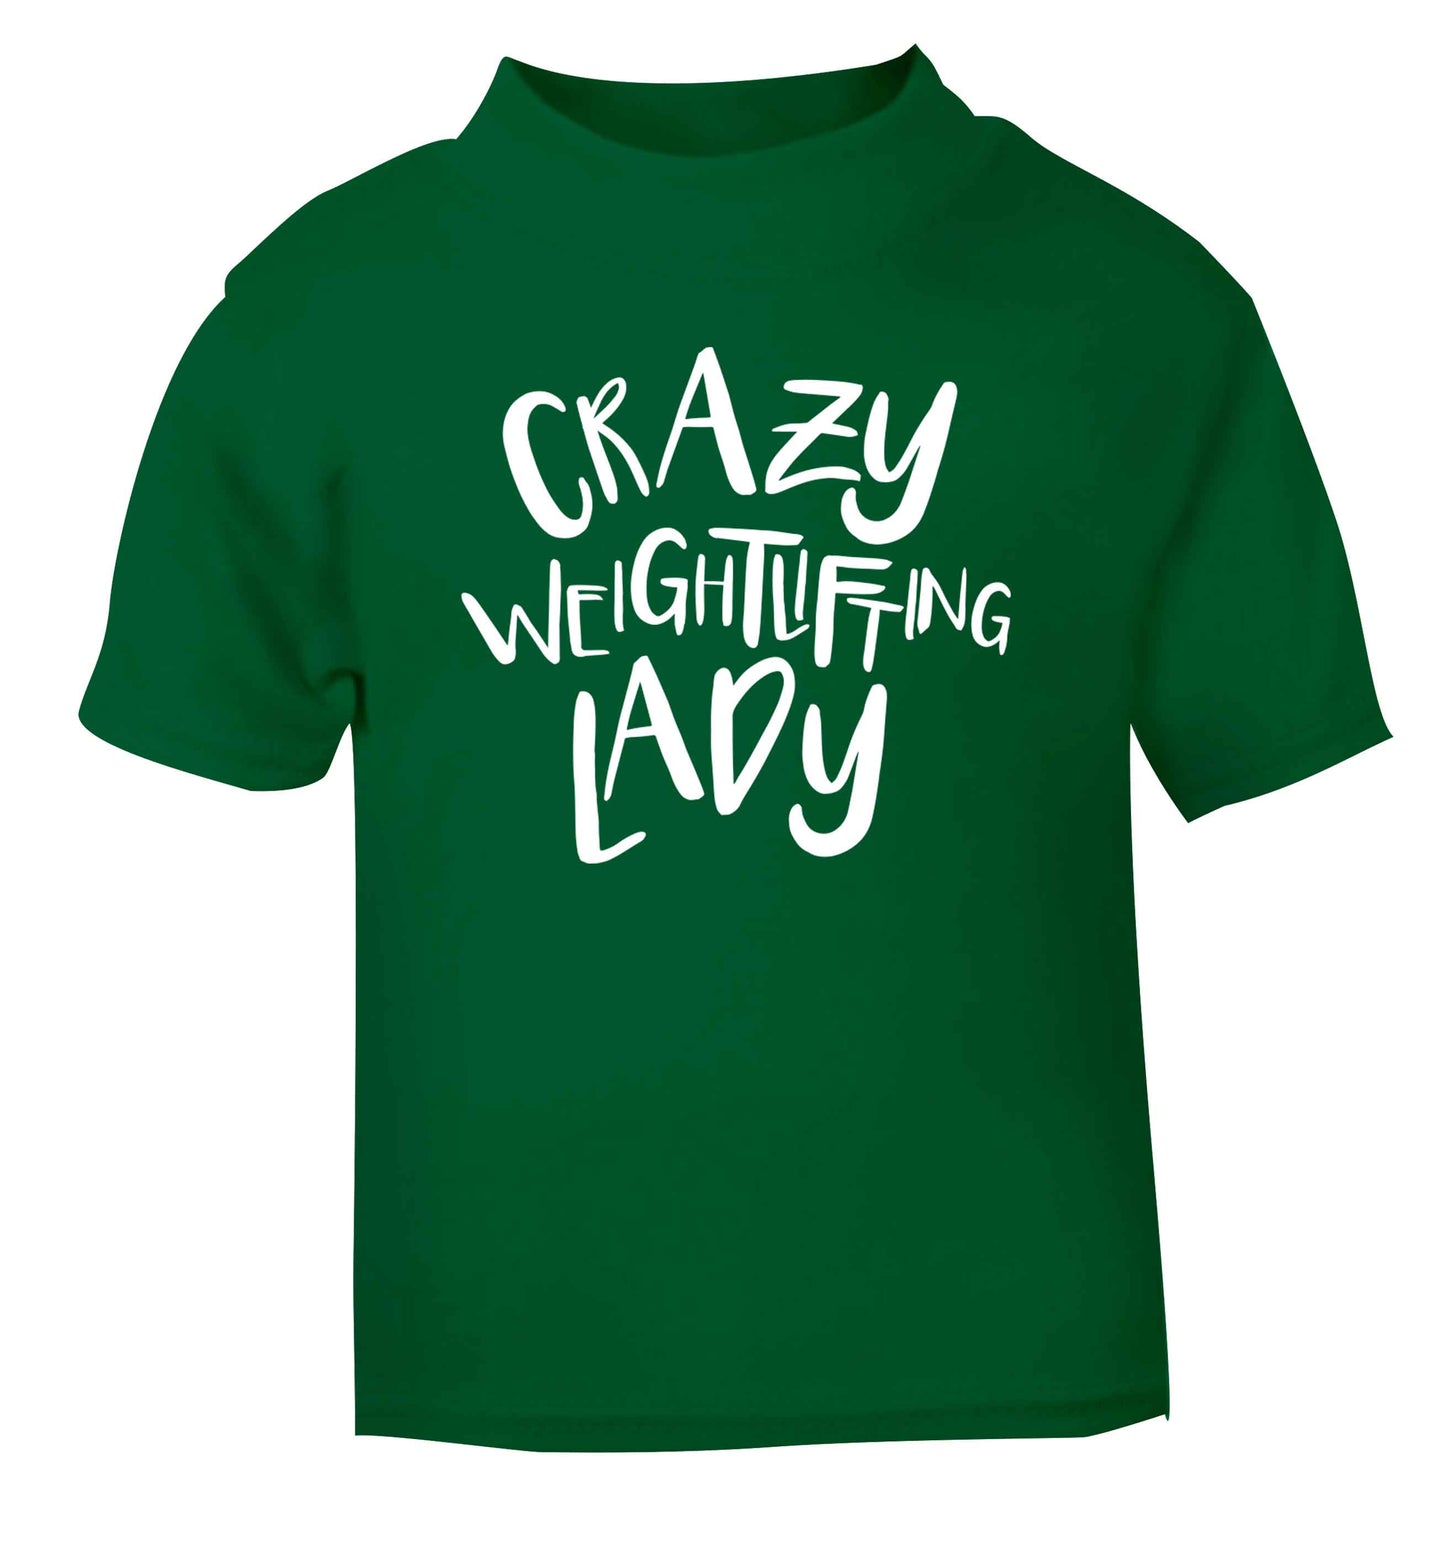 Crazy weightlifting lady green Baby Toddler Tshirt 2 Years